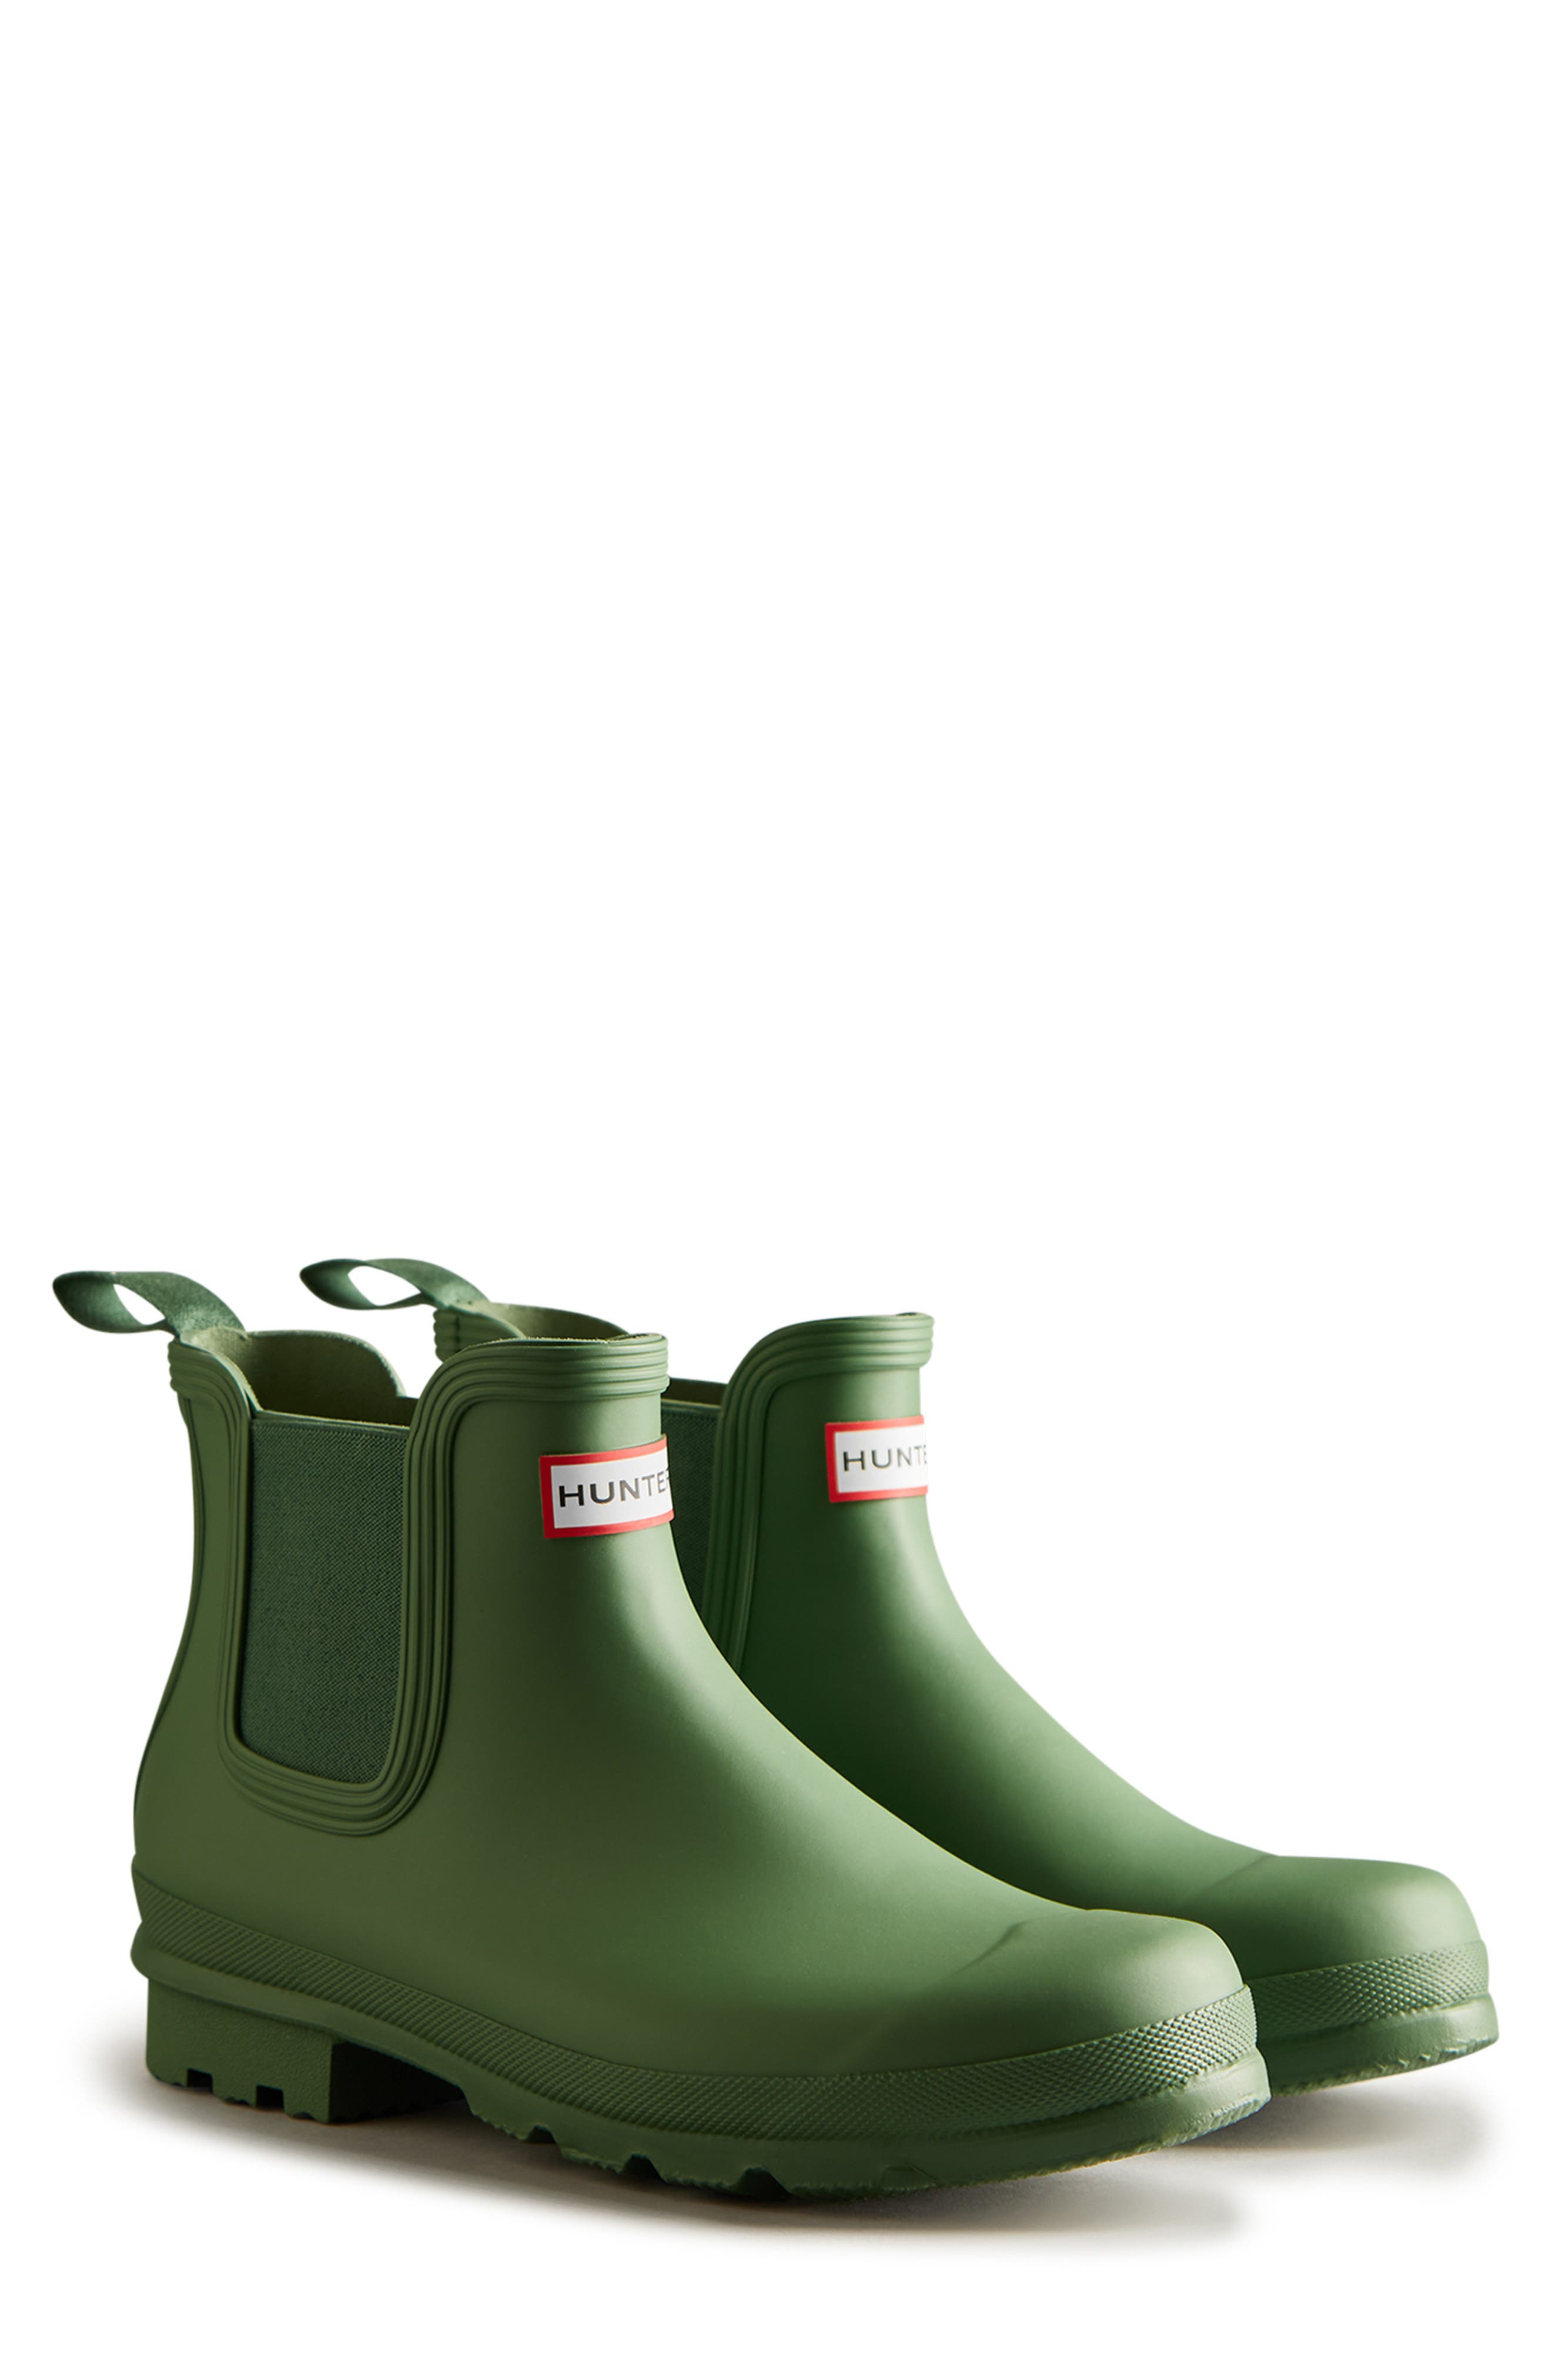 Mens Shoes Boots Wellington and rain boots Loewe Rubber Translucent Rain Boots in White for Men 